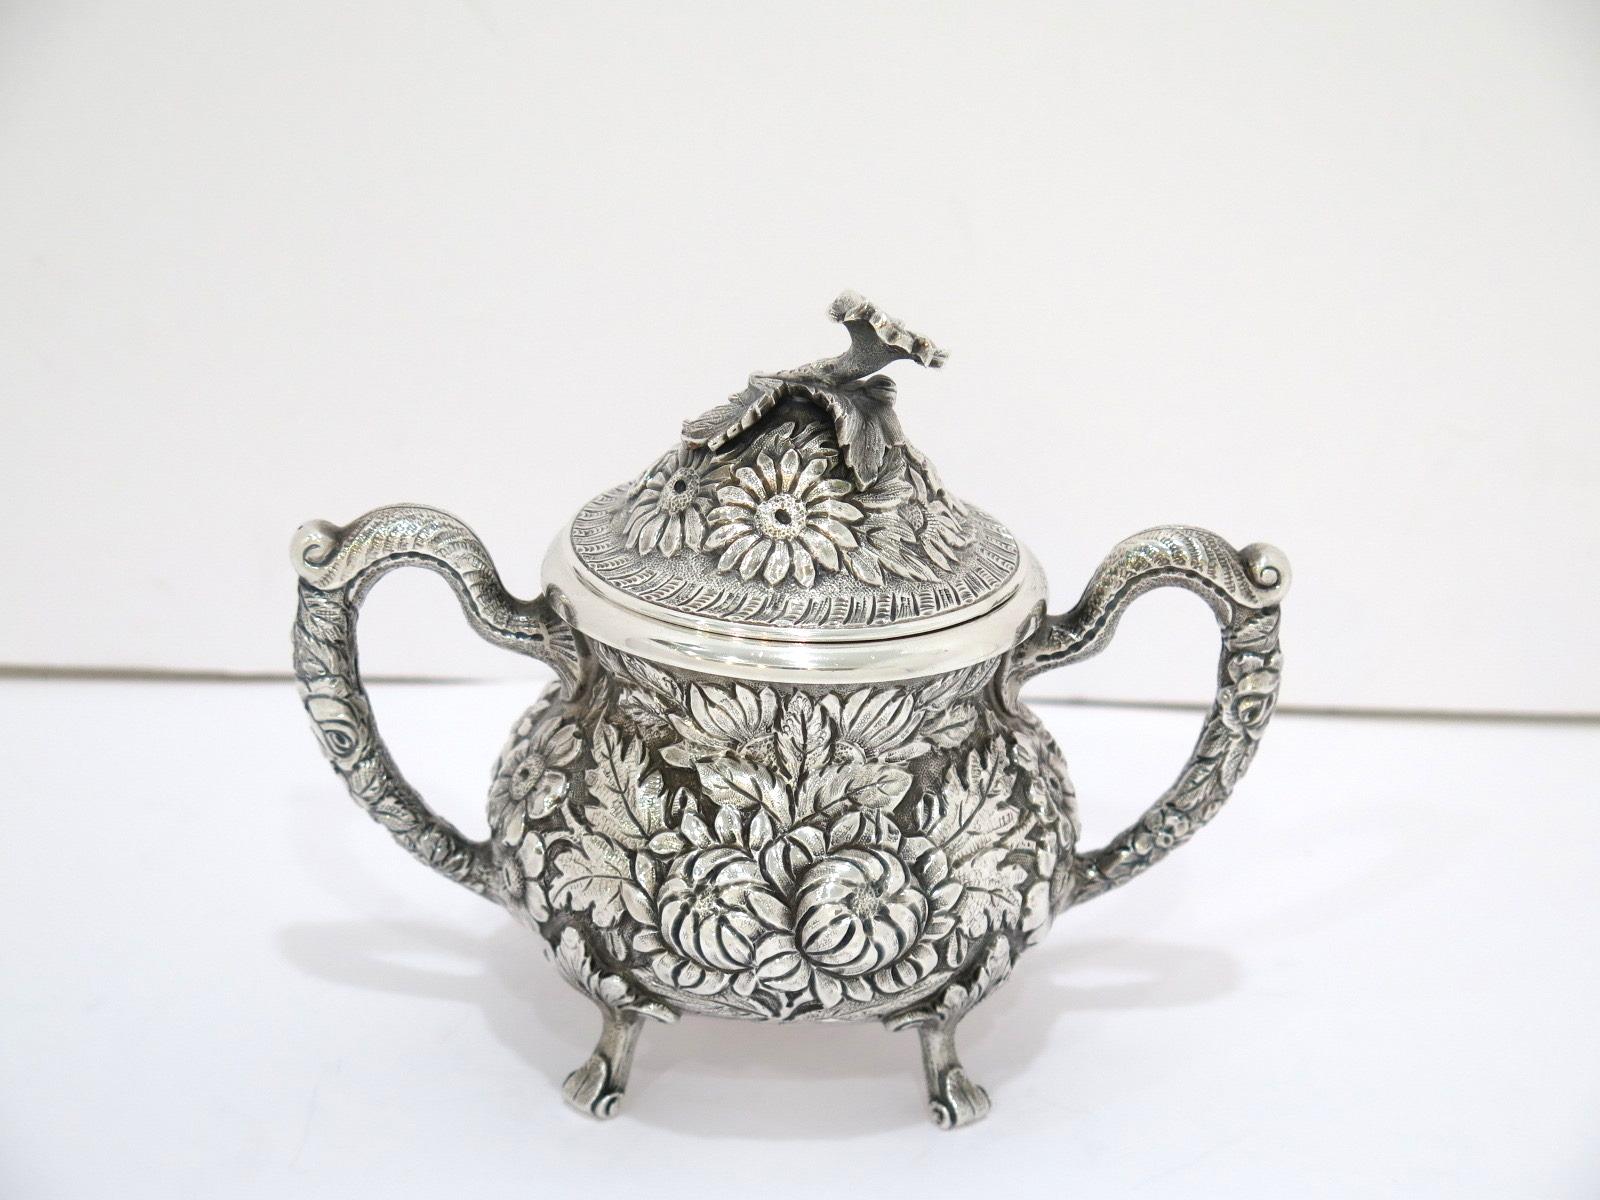 20th Century 3 Piece-Sterling Silver Stieff Vintage Floral Repousse Tea / Coffee Service For Sale